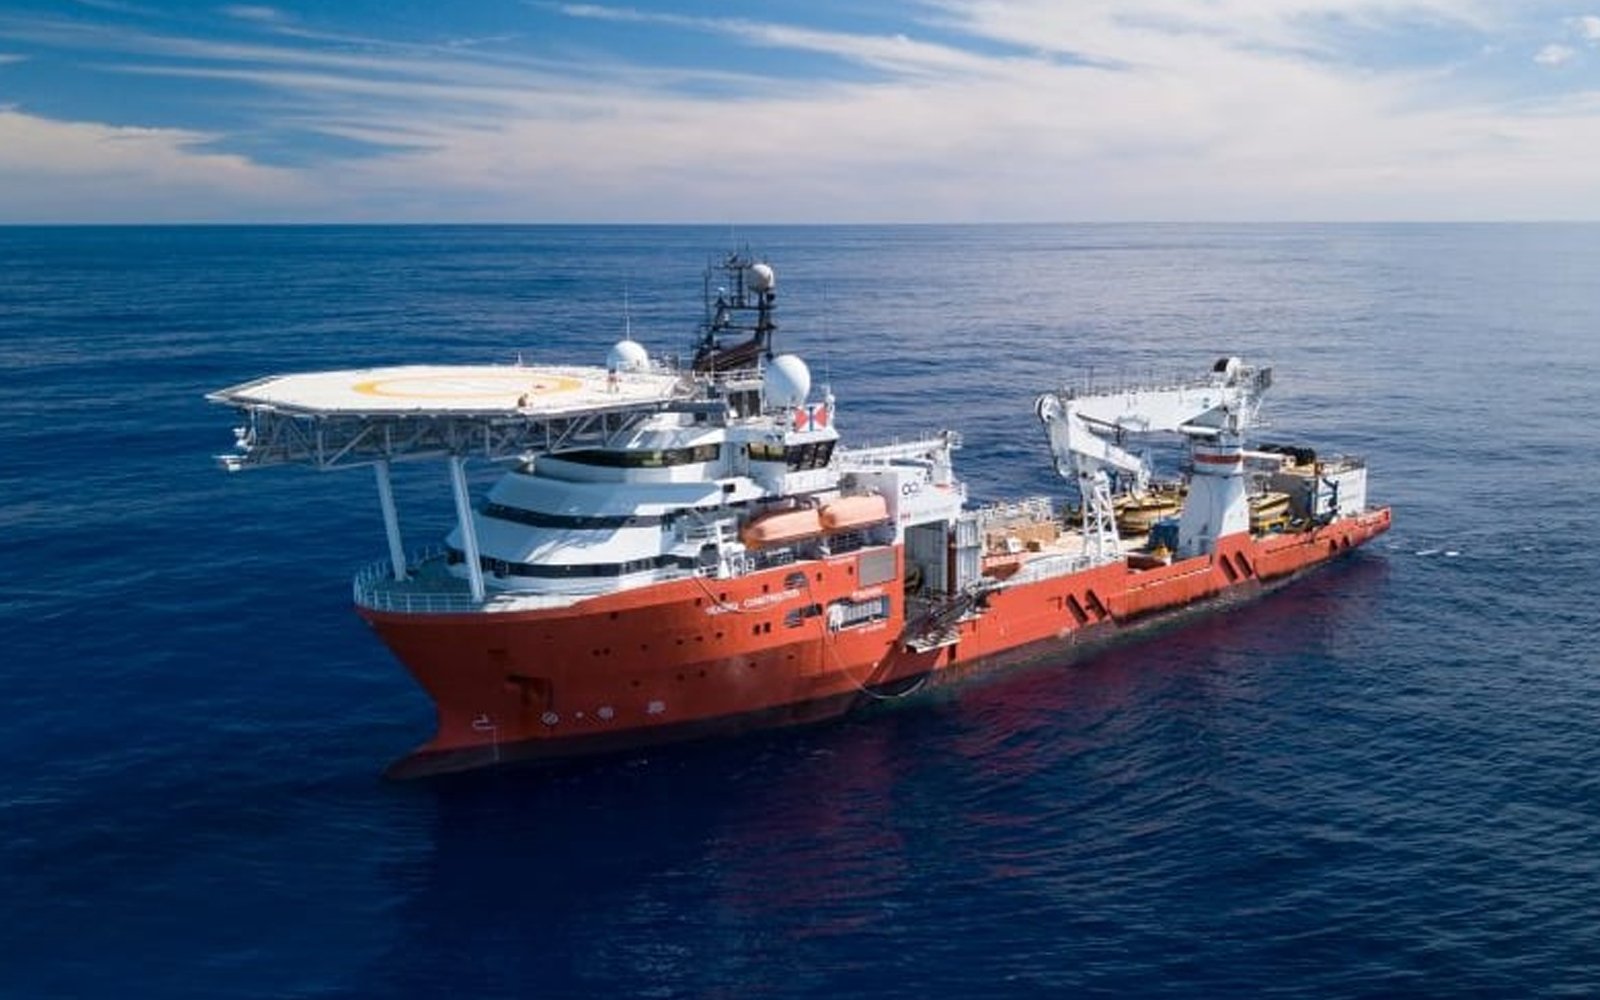 ocean infinity proposes november start for mh370 search